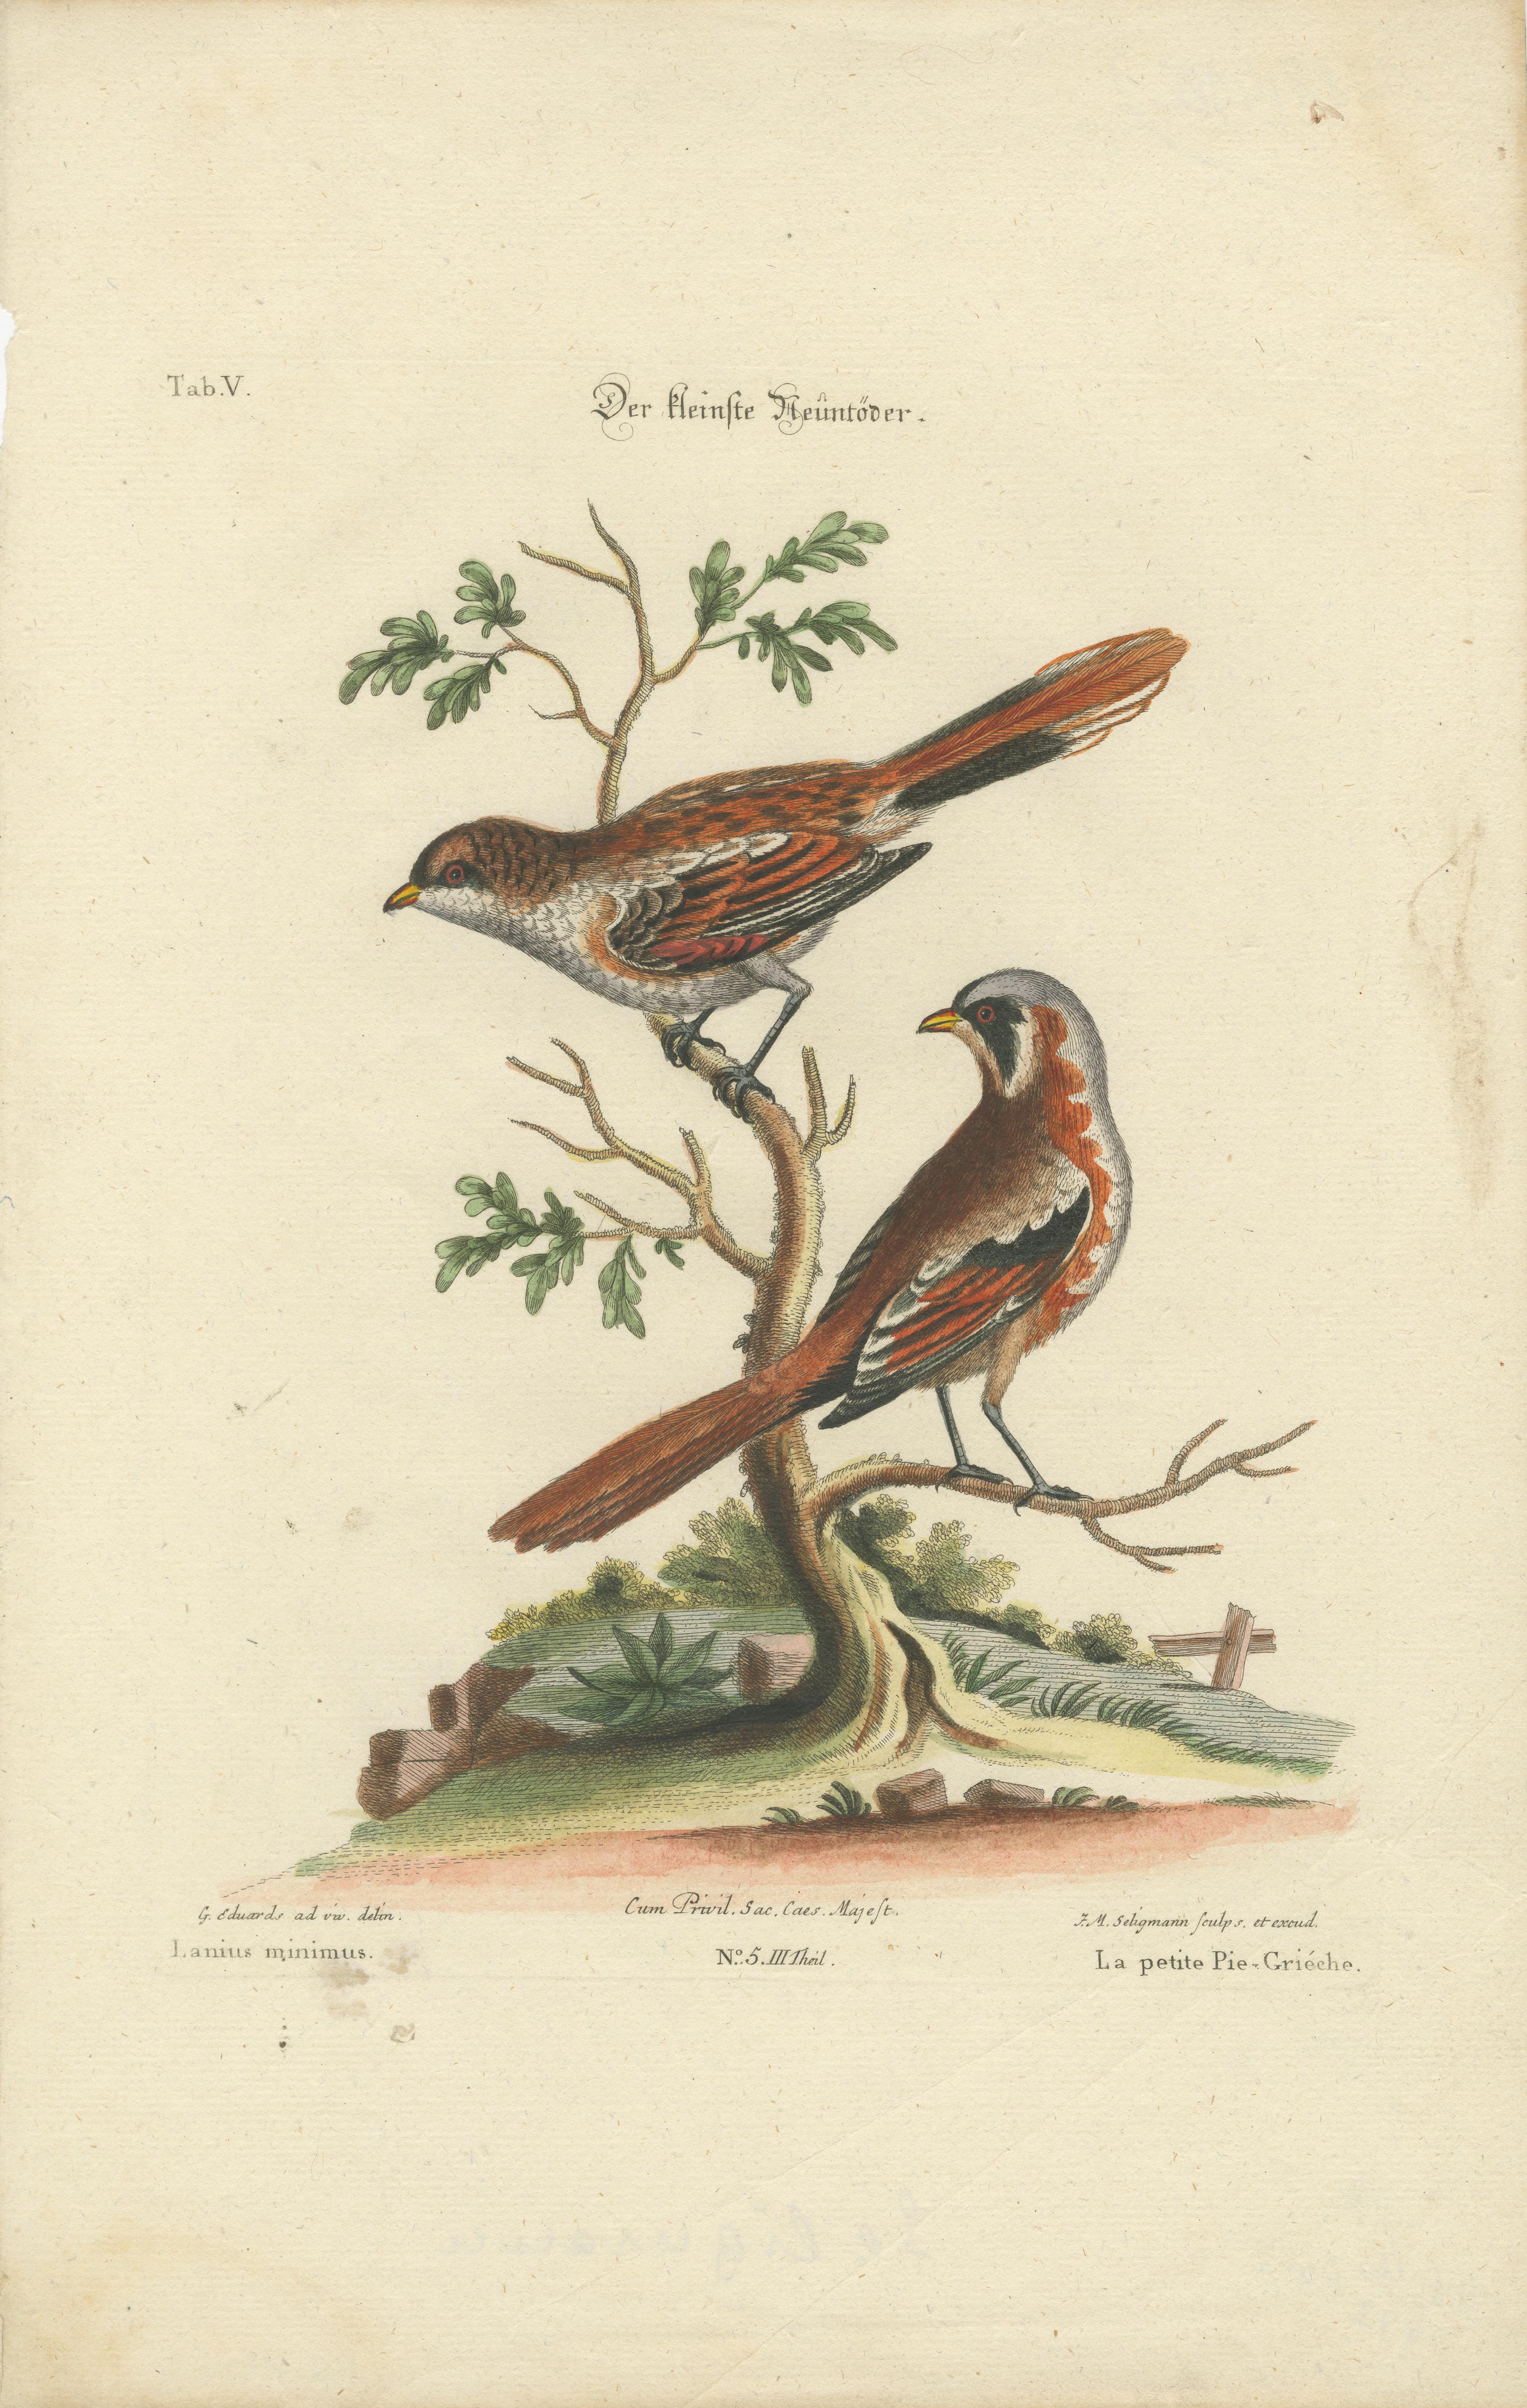 The illustration is indicative of the works that emerged from the collaborations and influences of the 18th-century naturalists like George Edwards and Johann Michael Seligmann. George Edwards was an English naturalist and ornithologist, known as